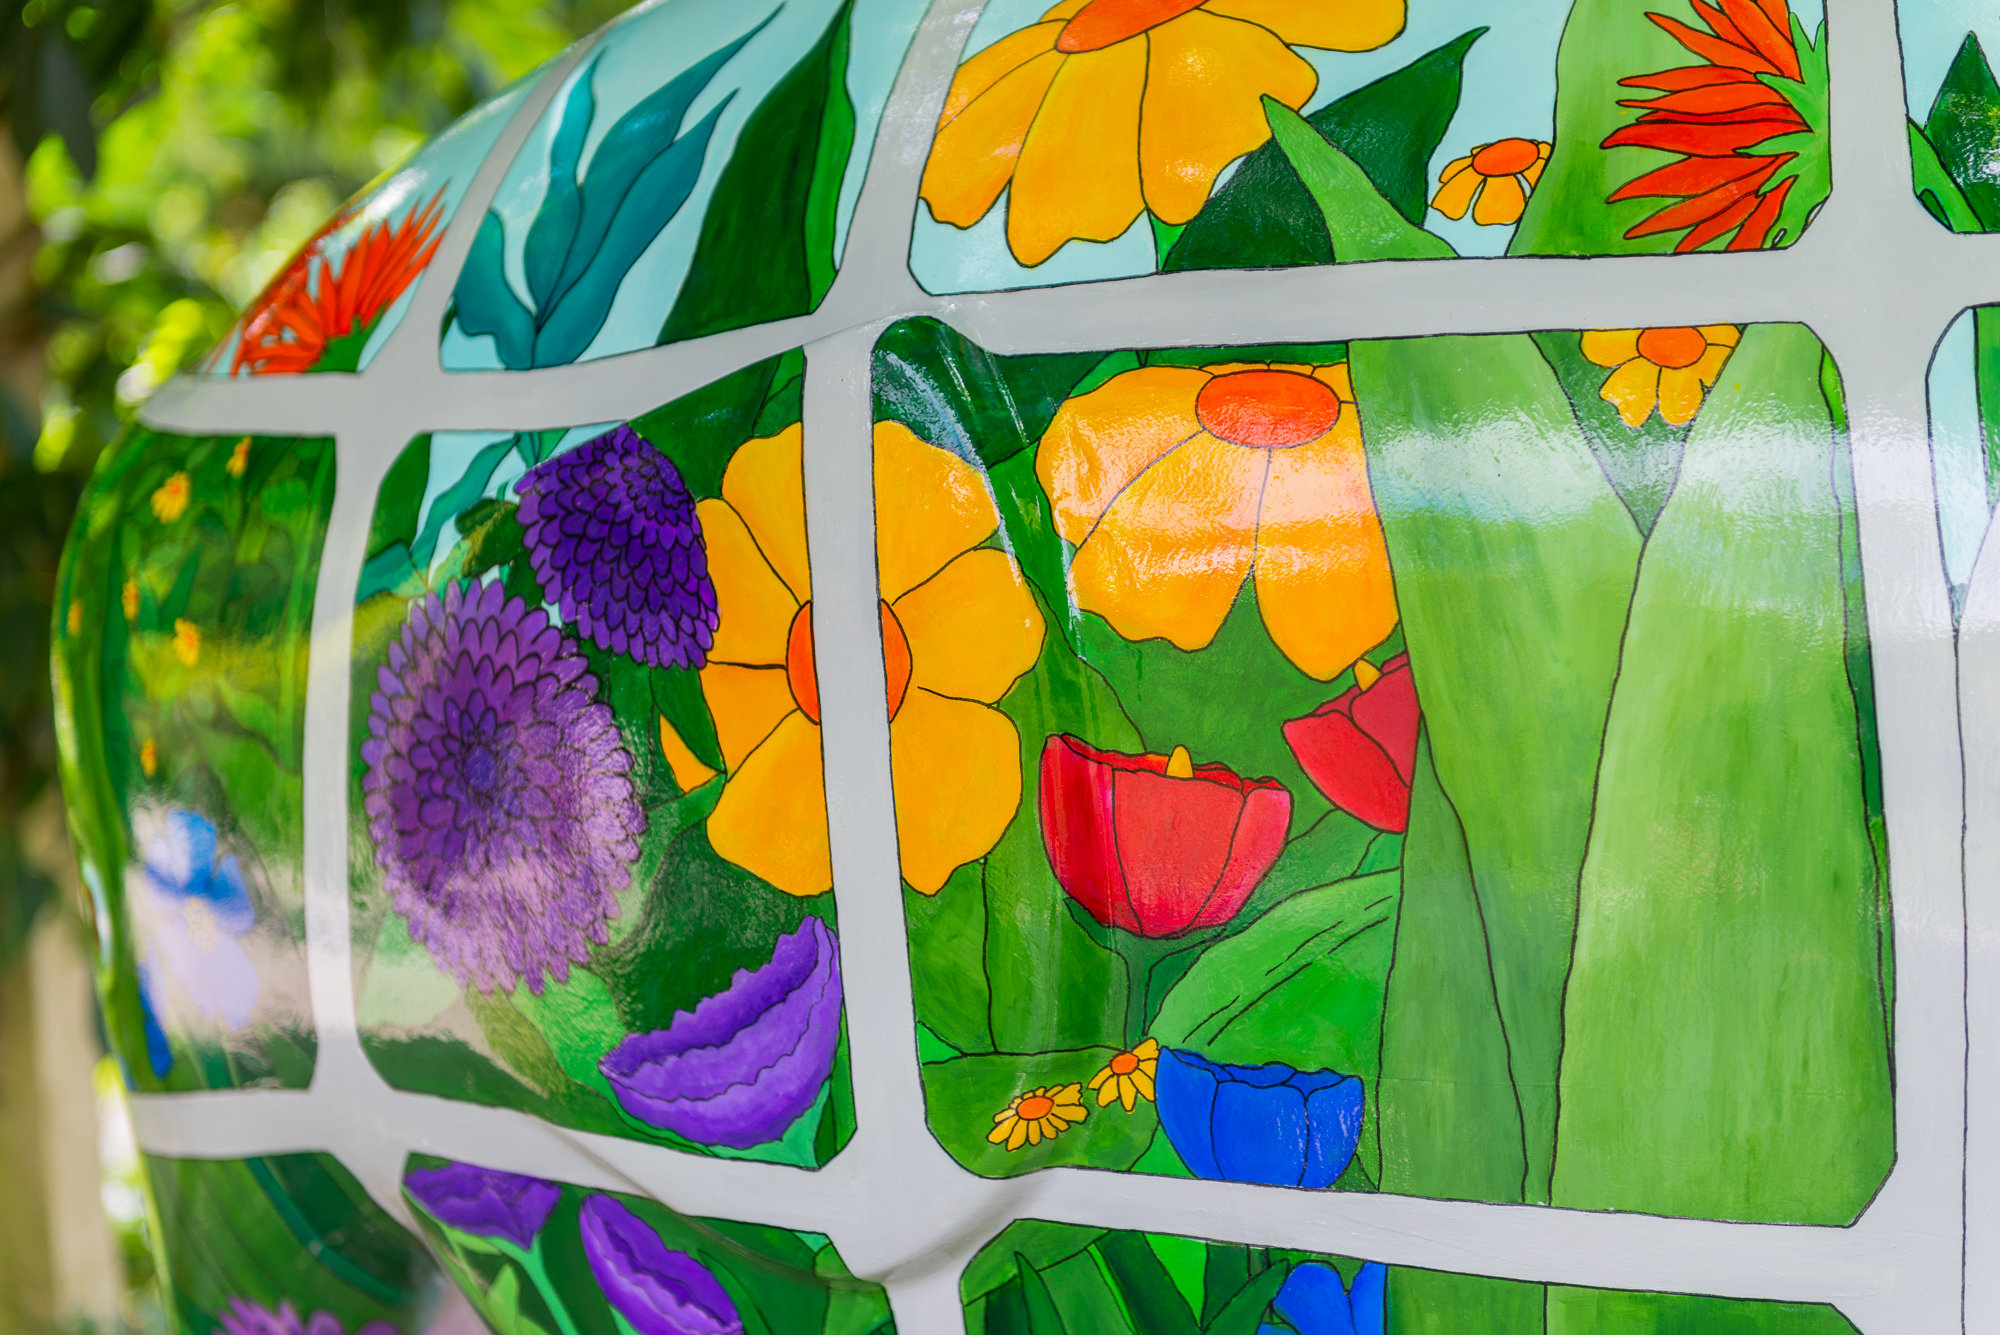 'Blooming Greenhouse' by Leah Hayler. Sponsored by St Luke's Hospice Plymouth - Image 12 of 13